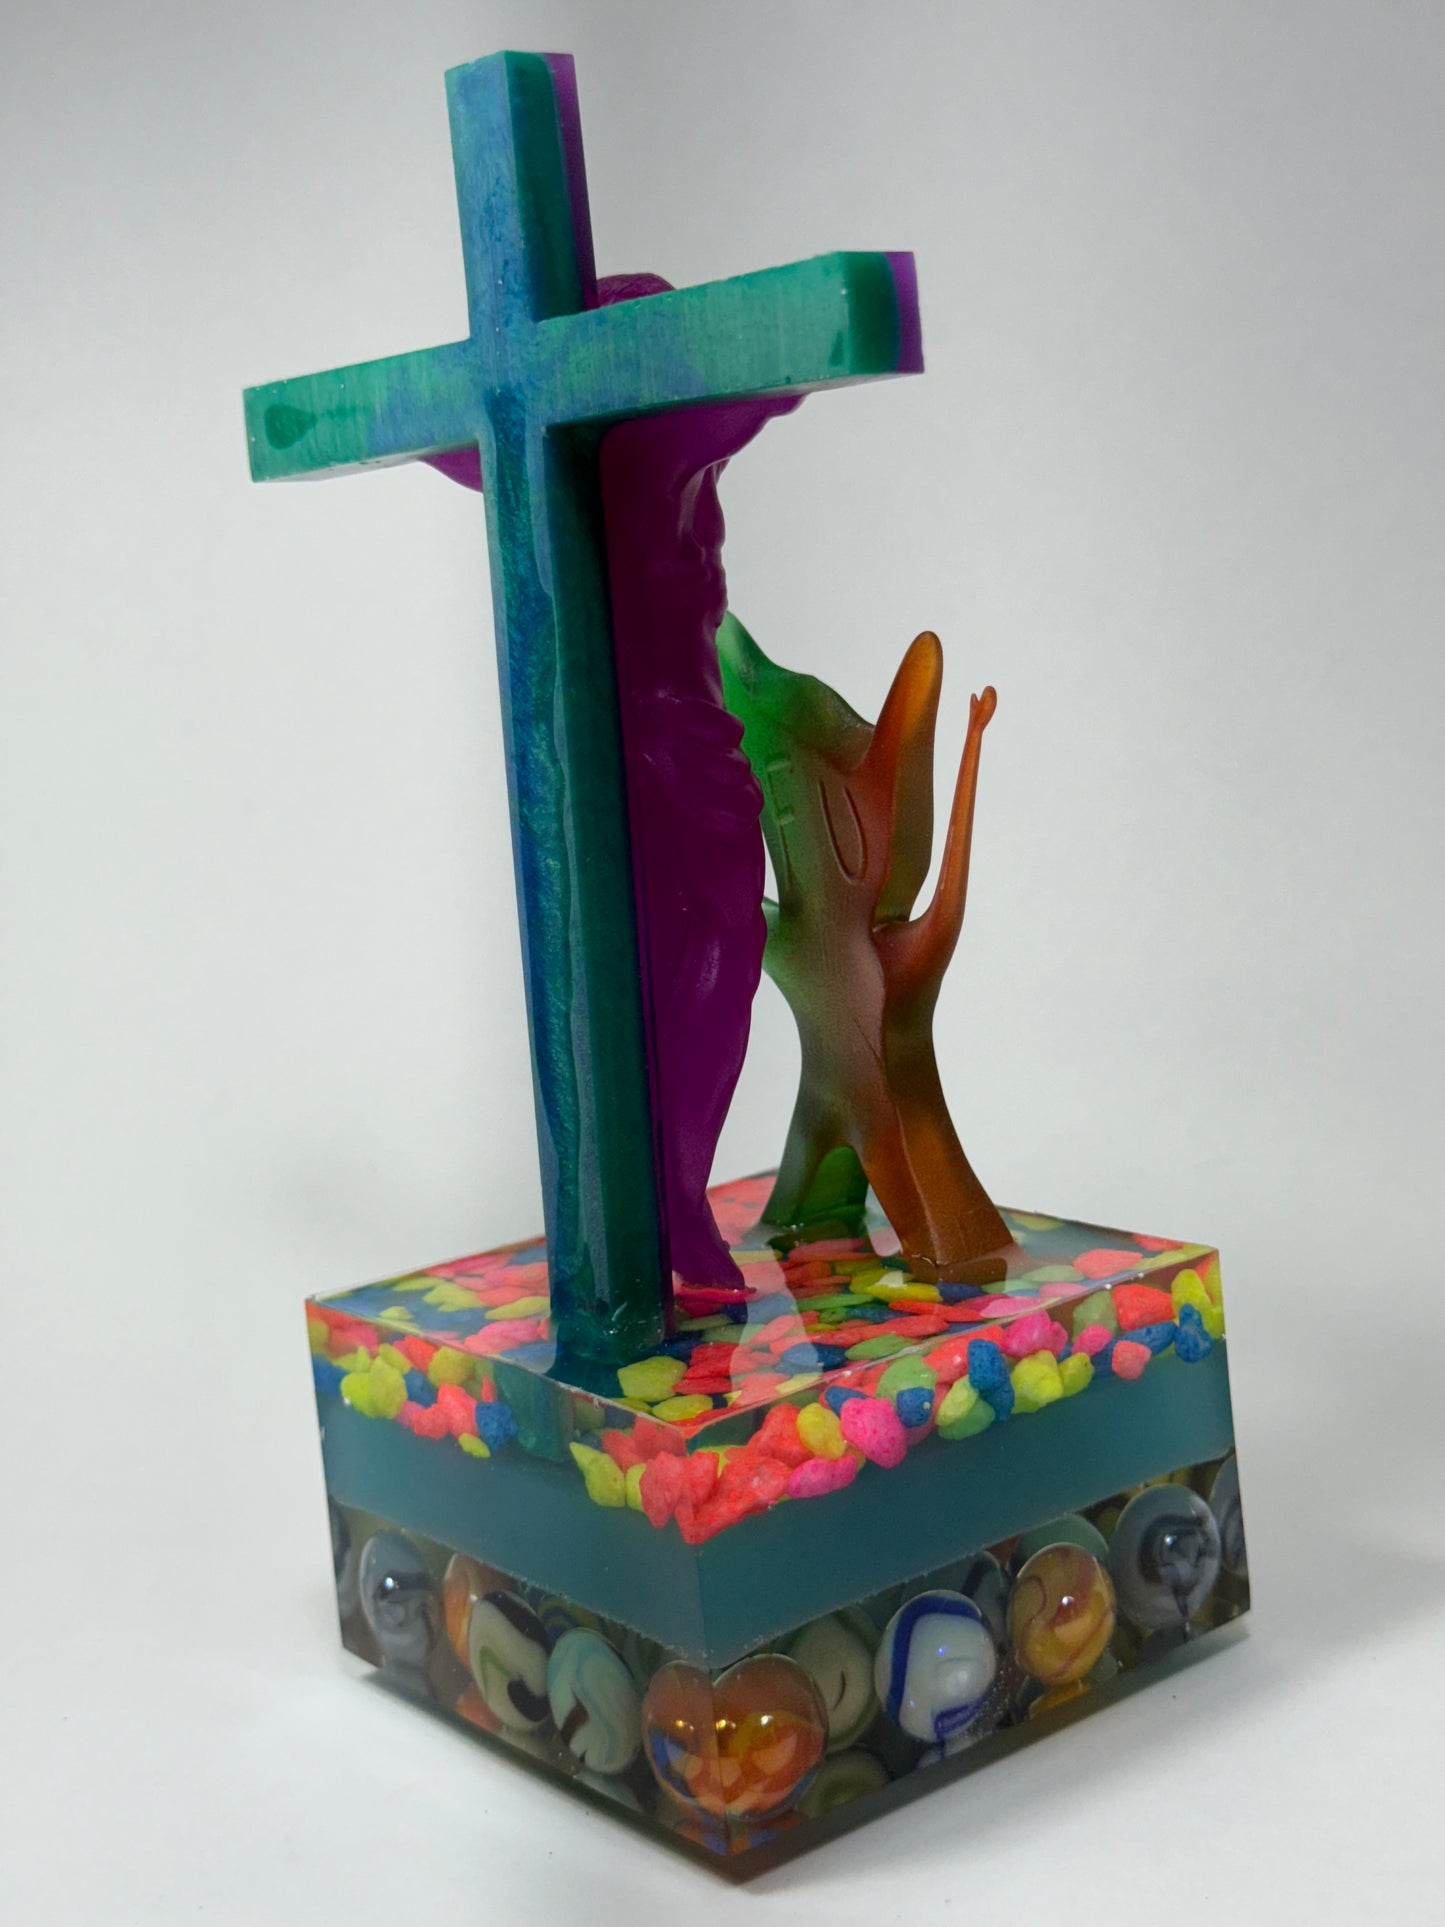 Altar of the Destitute Ape: Gum-Bee Turns His Back to Jesus Christ